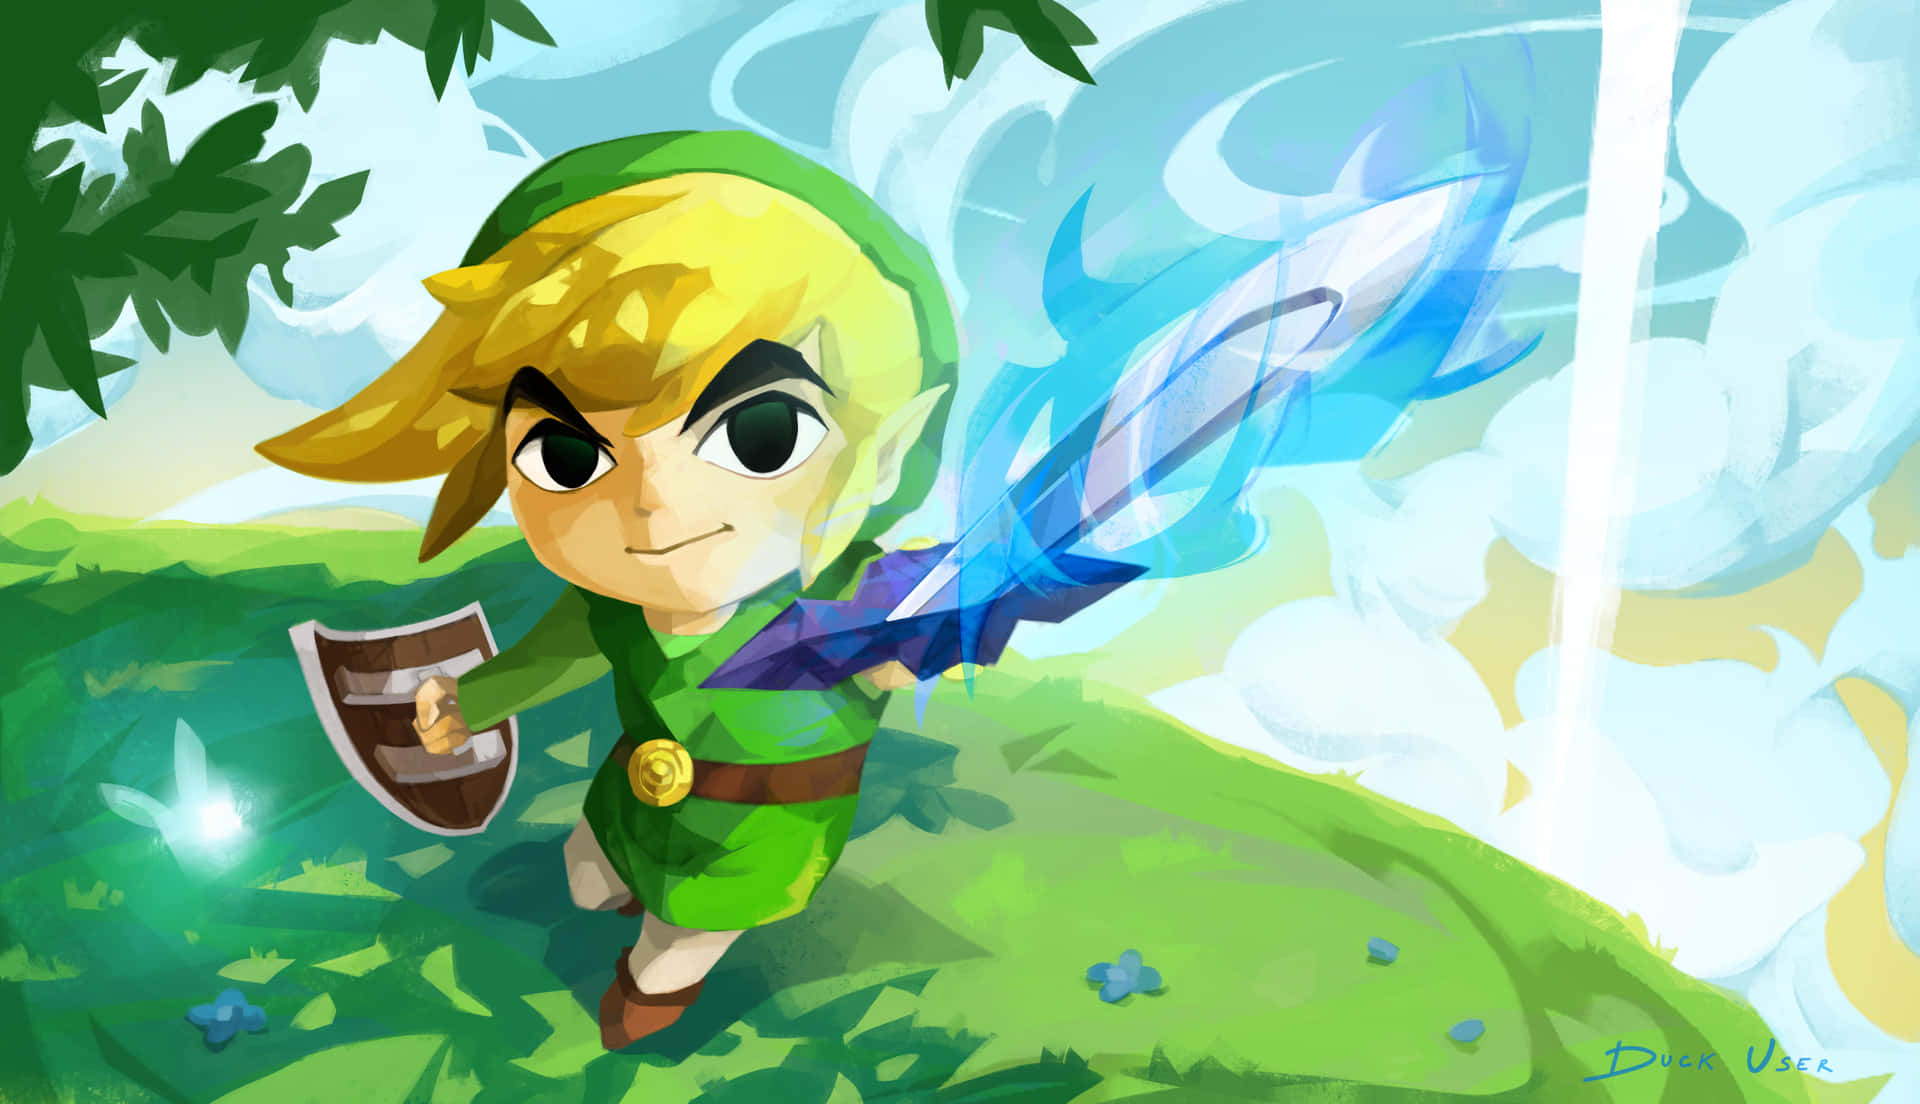 Toon Link With His Flaming Sword Background